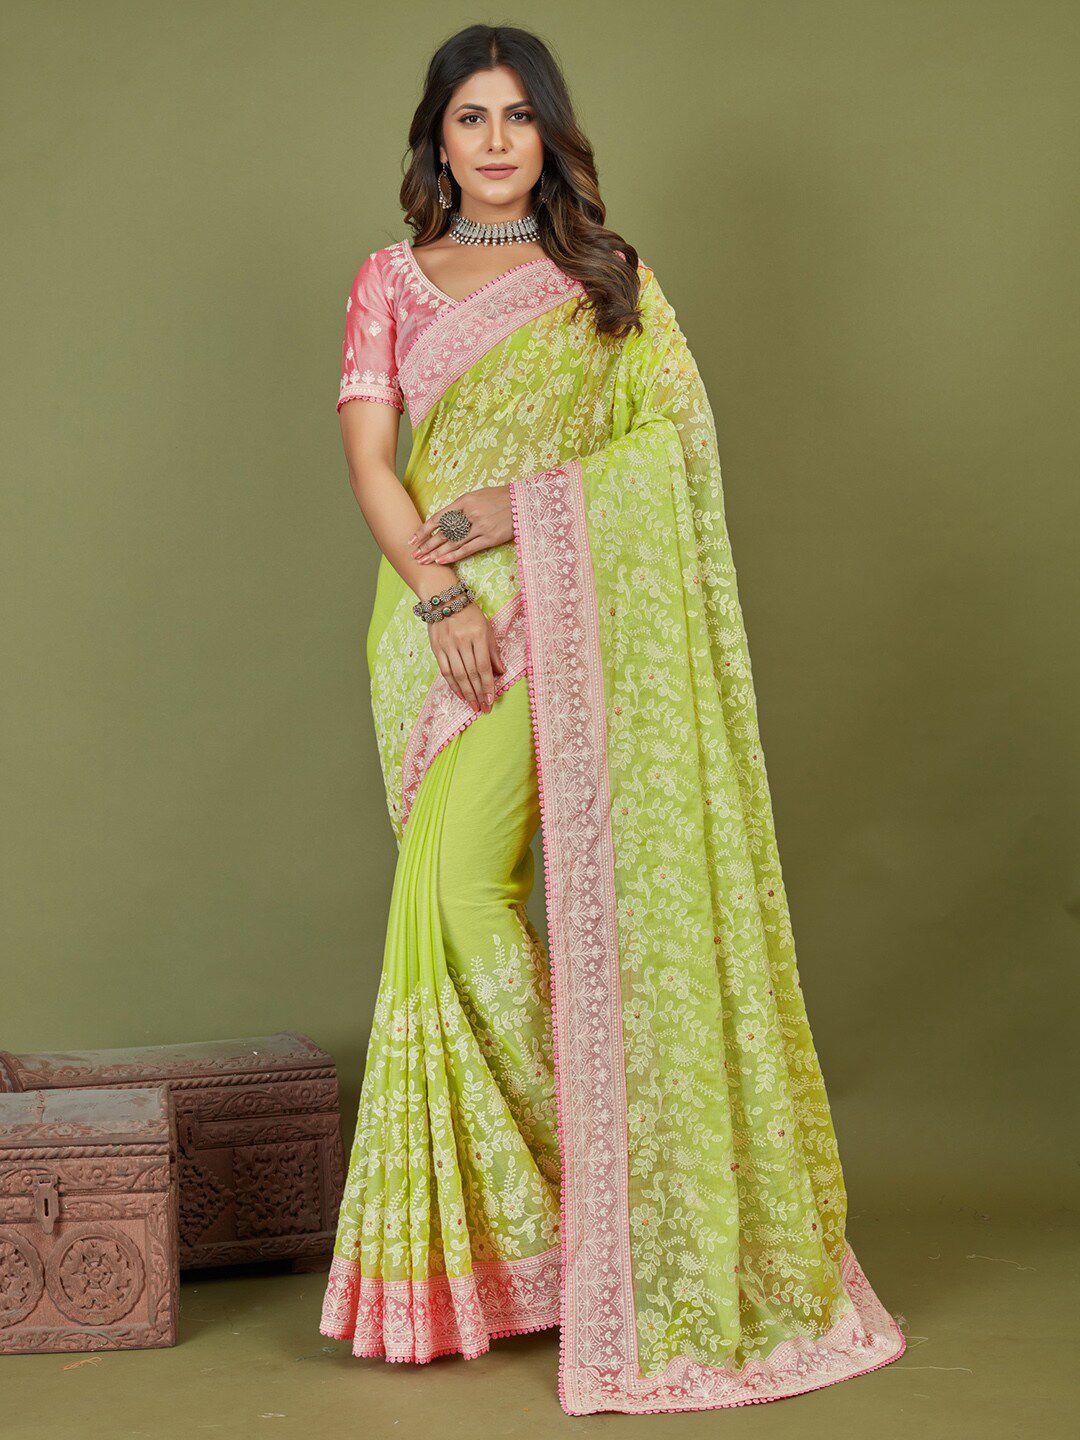 saree mall yellow & pink floral embroidered pure chiffon sarees